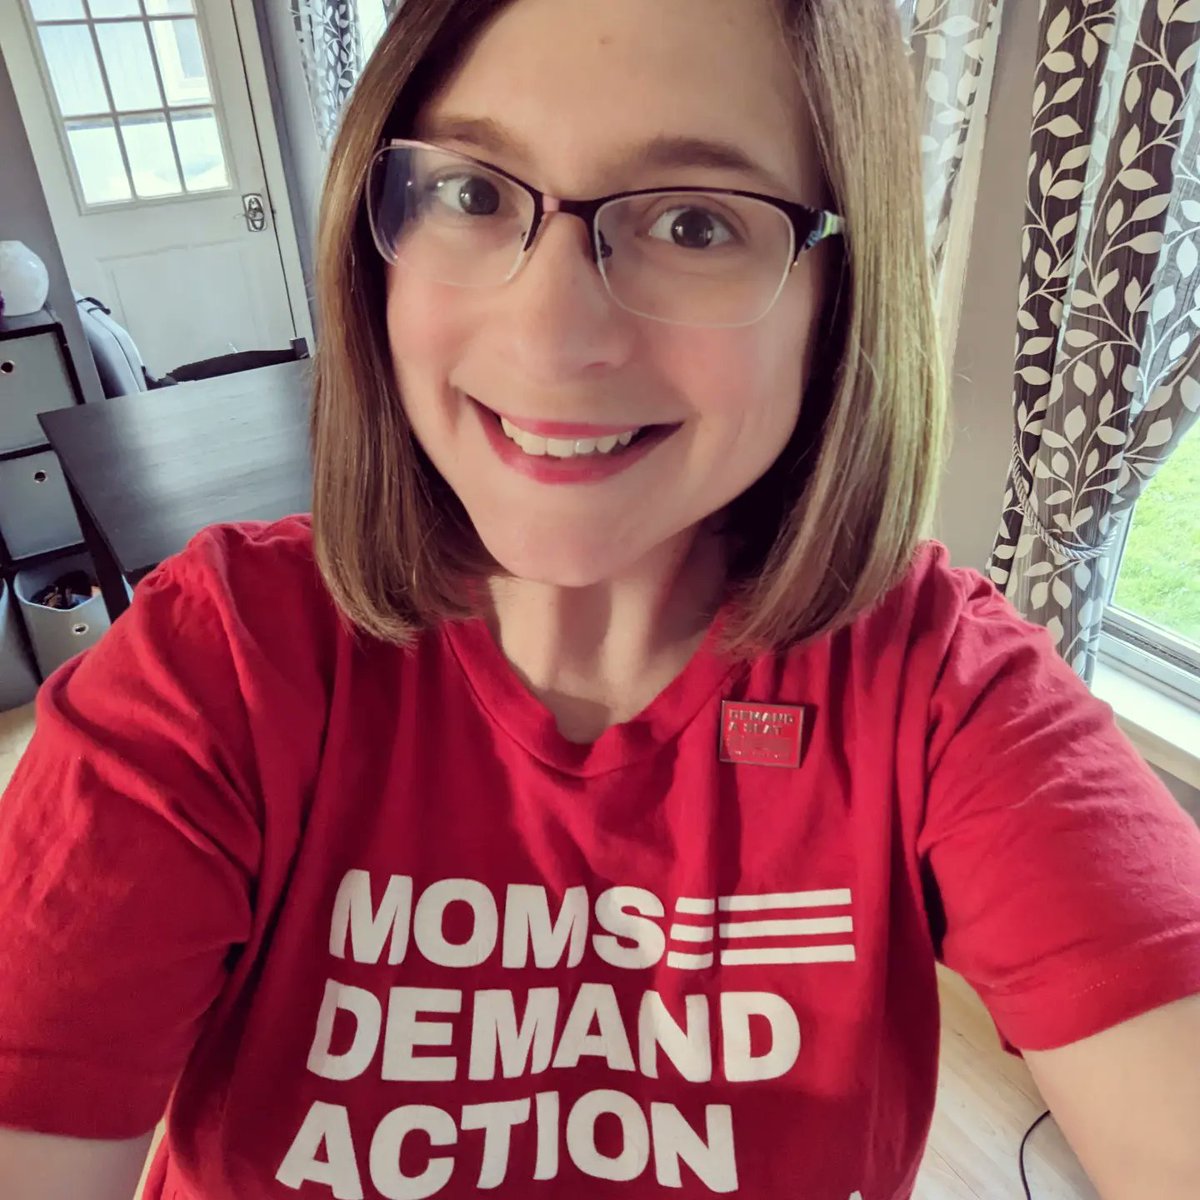 I'm ready to #DemandASeat. Proud to graduate from this inspiring training program. Now it's time to put it all into practice! Demand. Run. Change. @Everytown @MomsDemand